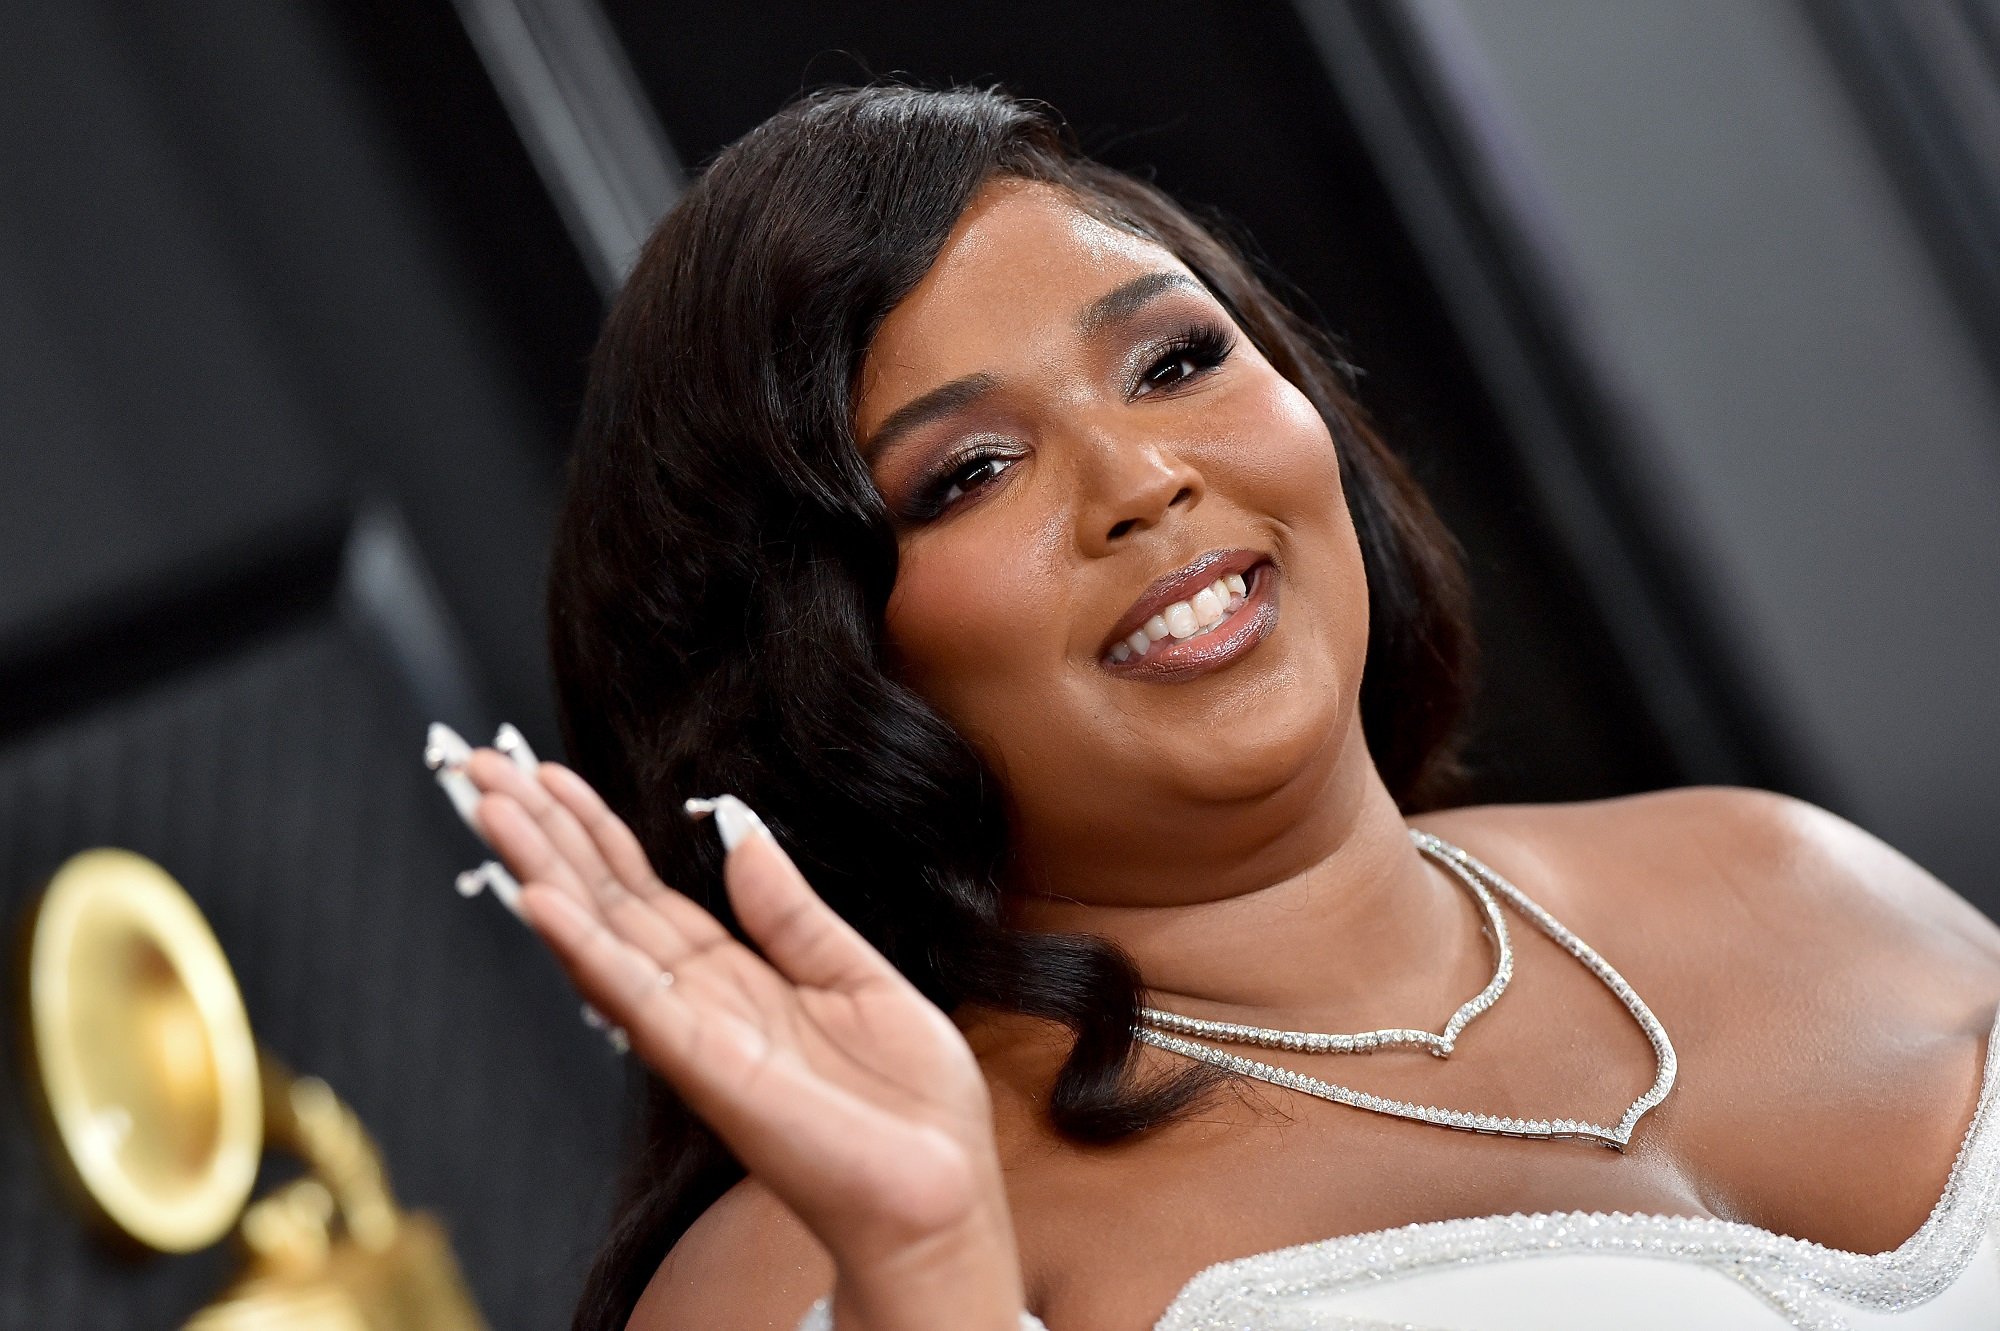 Lizzo attends the 62nd Annual GRAMMY Awards on January 26, 2020 in Los Angeles, California.